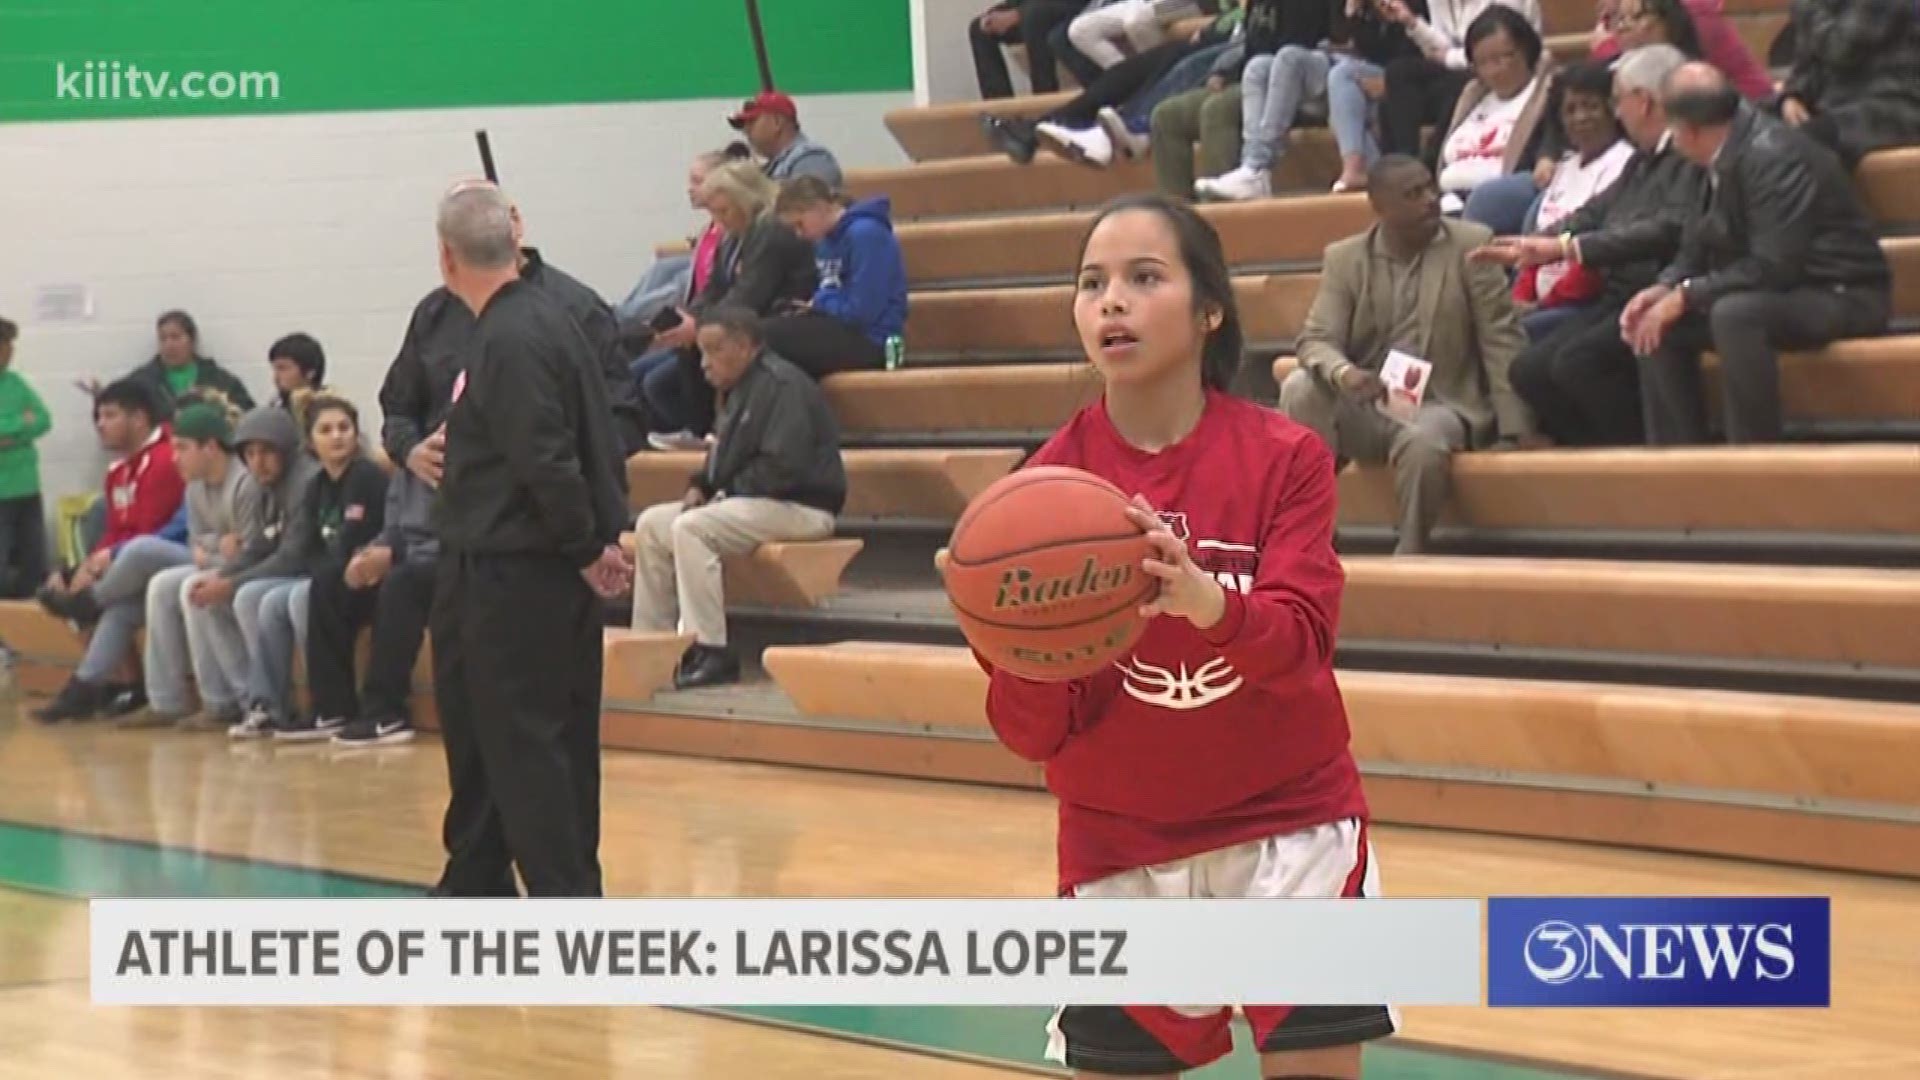 Lopez is a star for the West Oso girls basketball team averaging over 14 points a game.